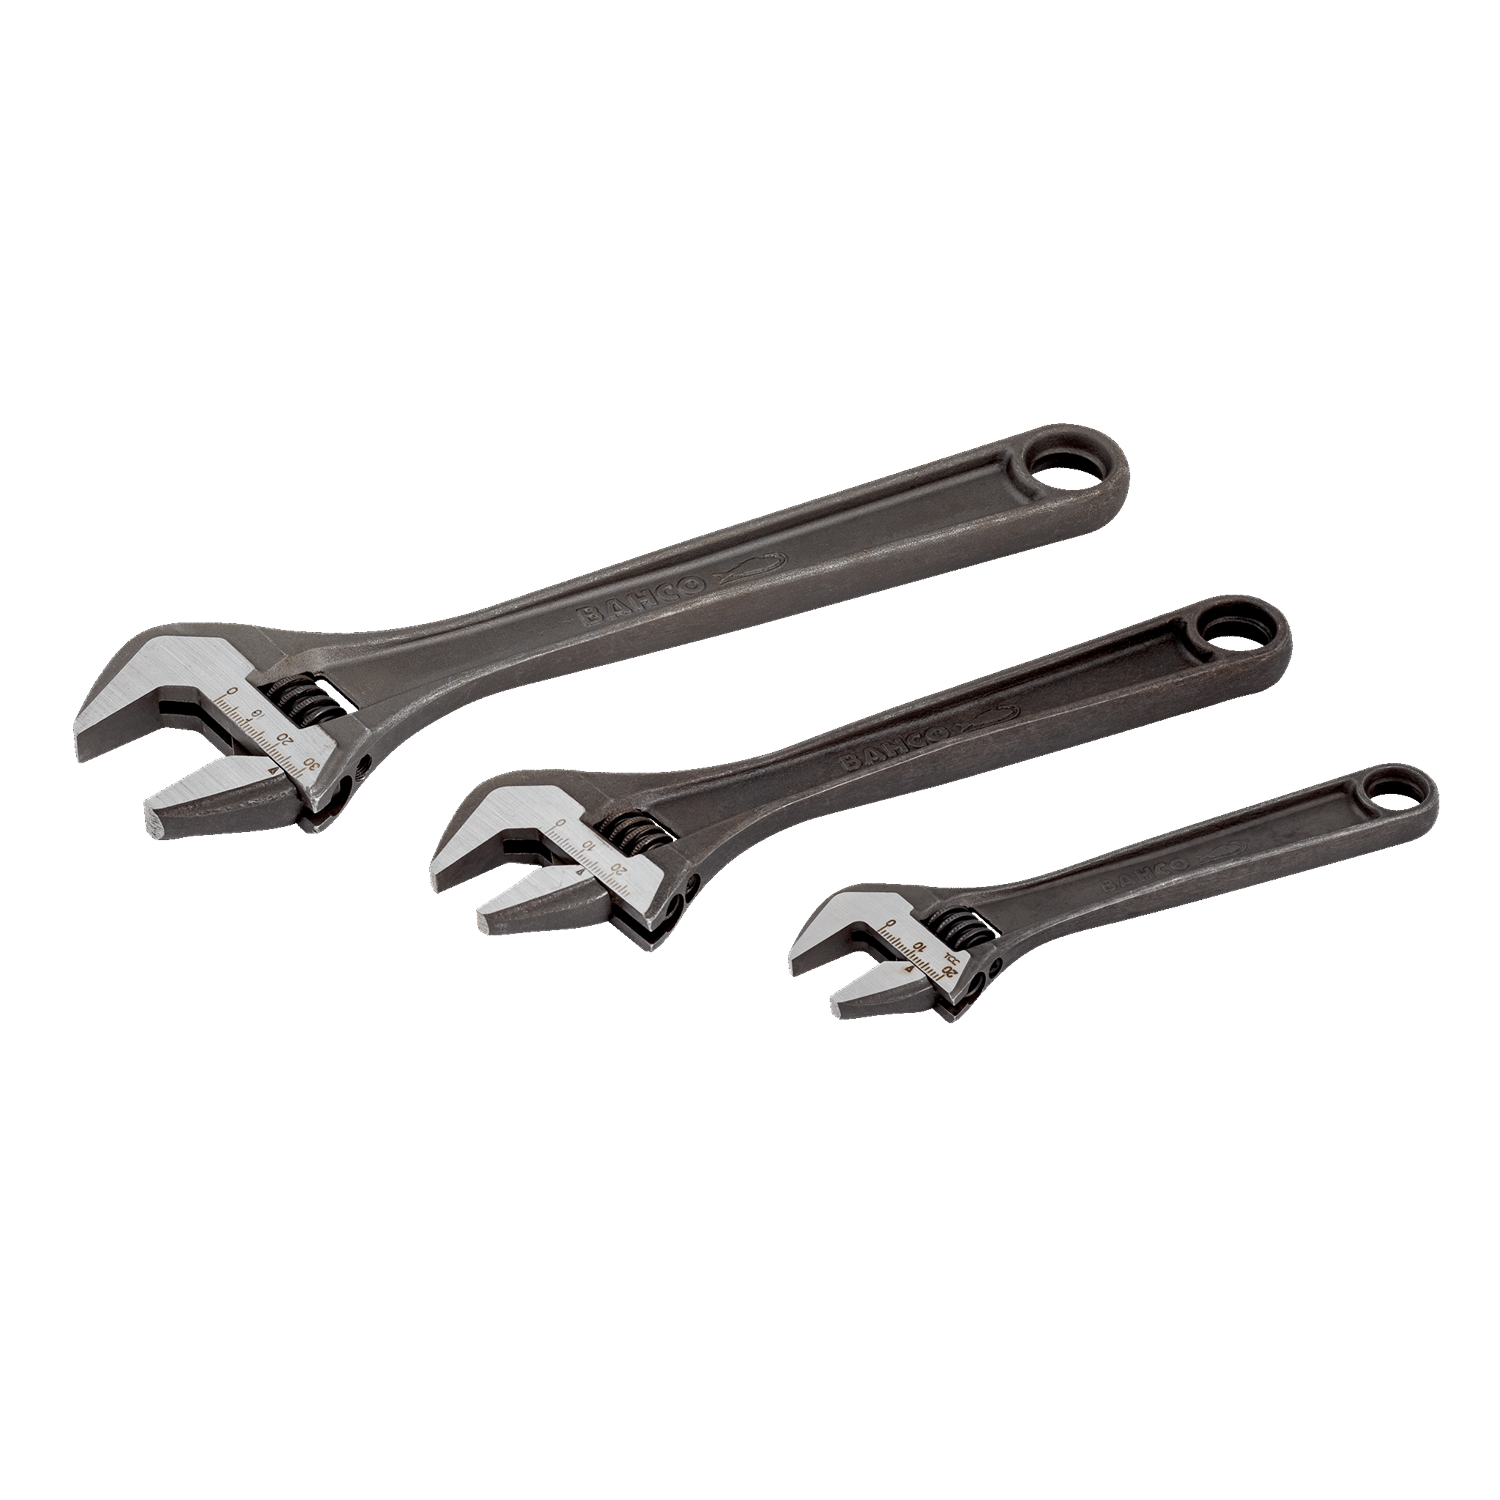 BAHCO ADJUST3 Standard Central Nut Adjustable Wrench Set - Premium Adjustable Wrench from BAHCO - Shop now at Yew Aik.